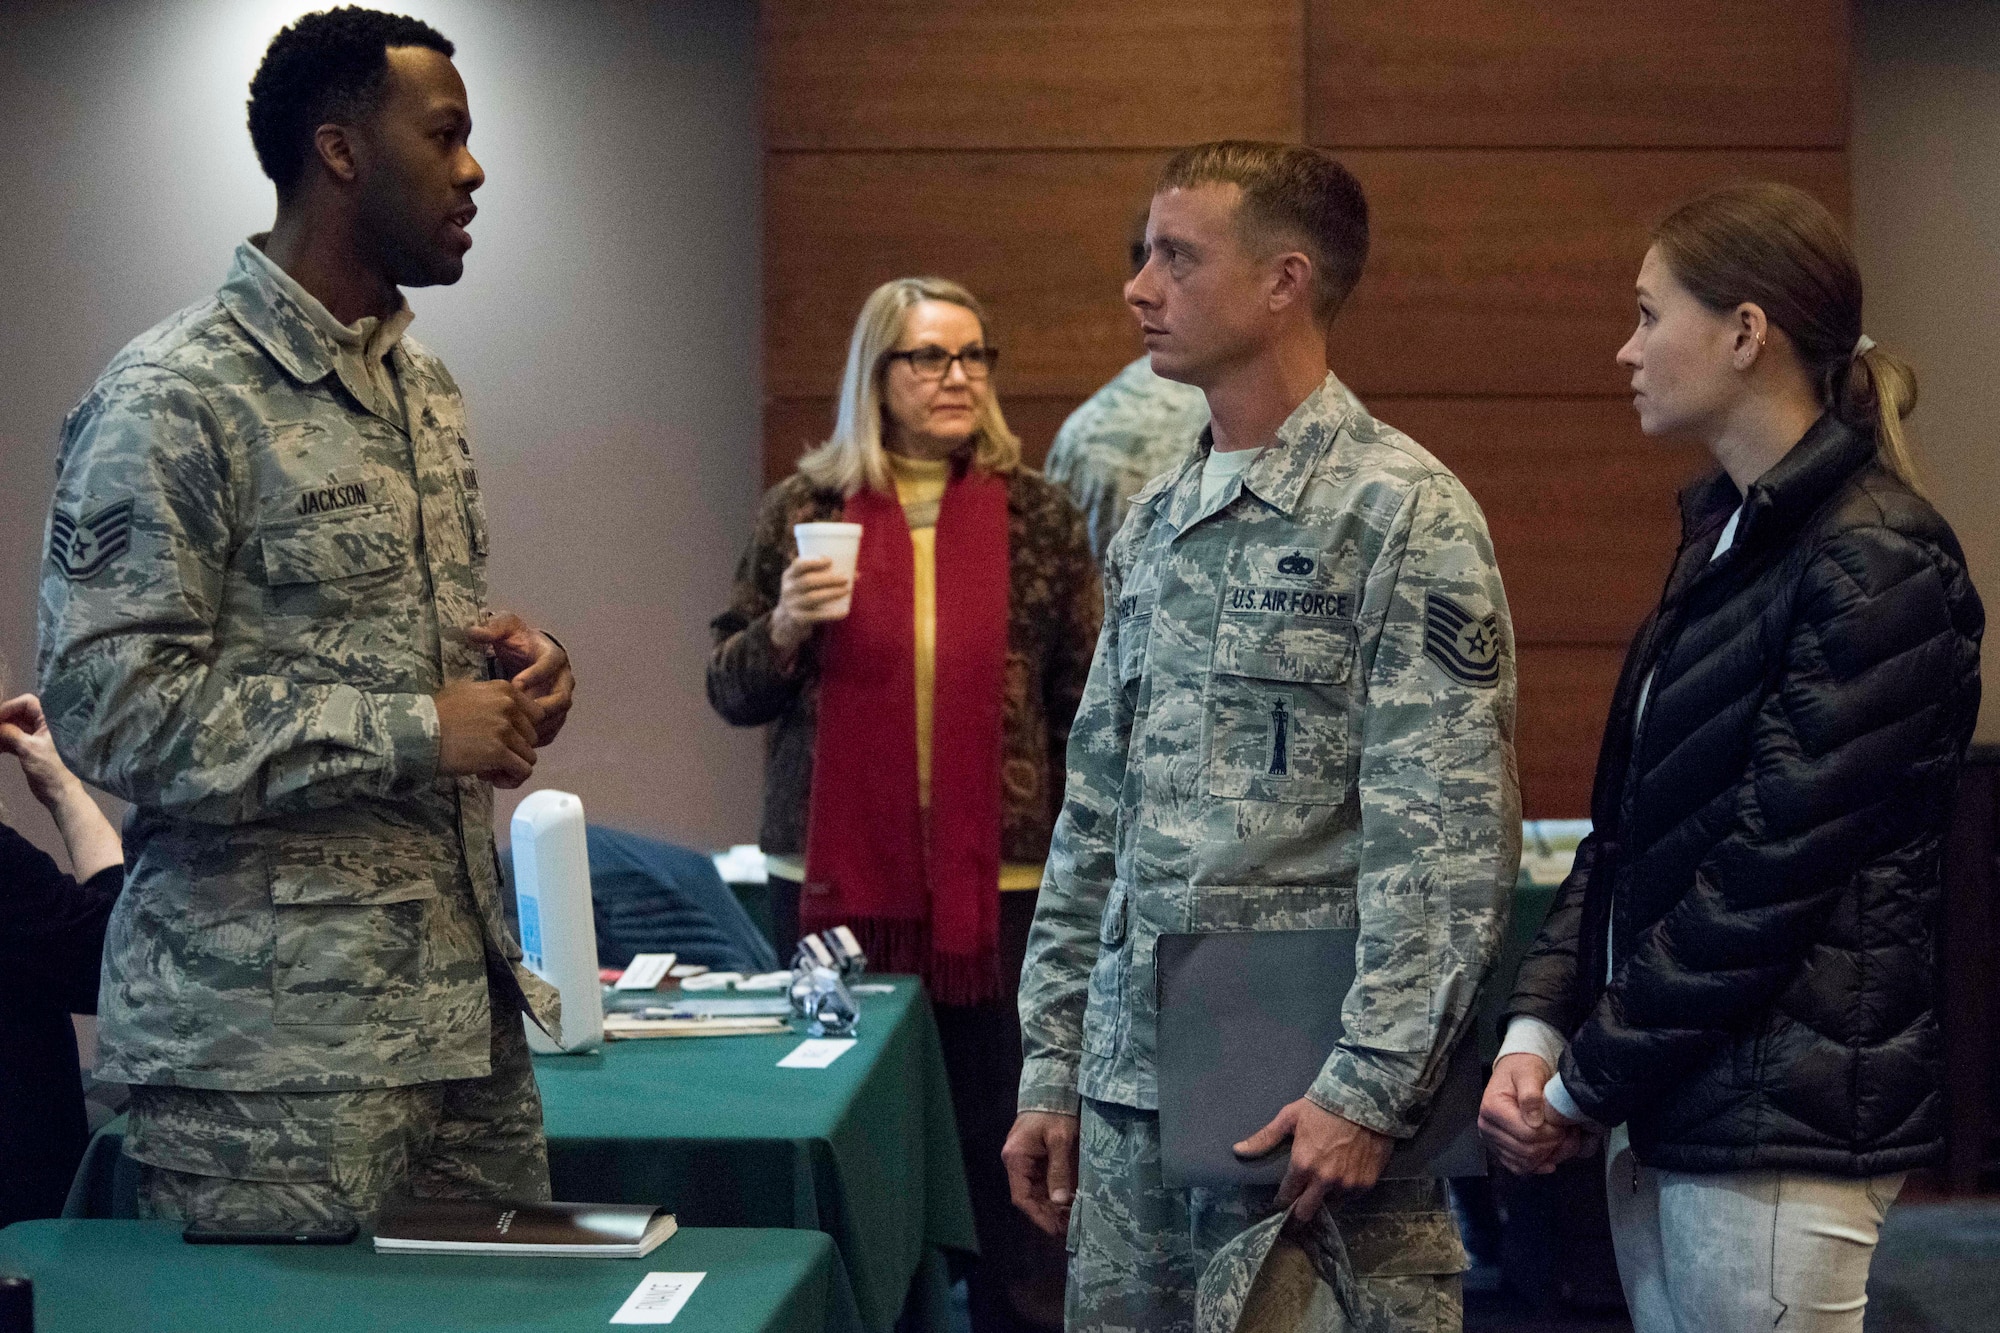 U.S. Air Force Staff Sgt. Terrence Jackson, a 673d Comptroller Squadron financial management specialist, speaks with Tech. Sgt. Justin Torrey, a 525th Aircraft Maintenance Squadron weapons load crew chief and his wife Olena Semyletko, during a welcome reception at Joint Base Elmendorf-Richardson, Alaska, April 8, 2019. The JBER Support to Tyndall Airmen and Families Reception was a one-stop information fair connecting them with the appropriate agencies to address their immediate and specific needs and to learn more about services they offer.